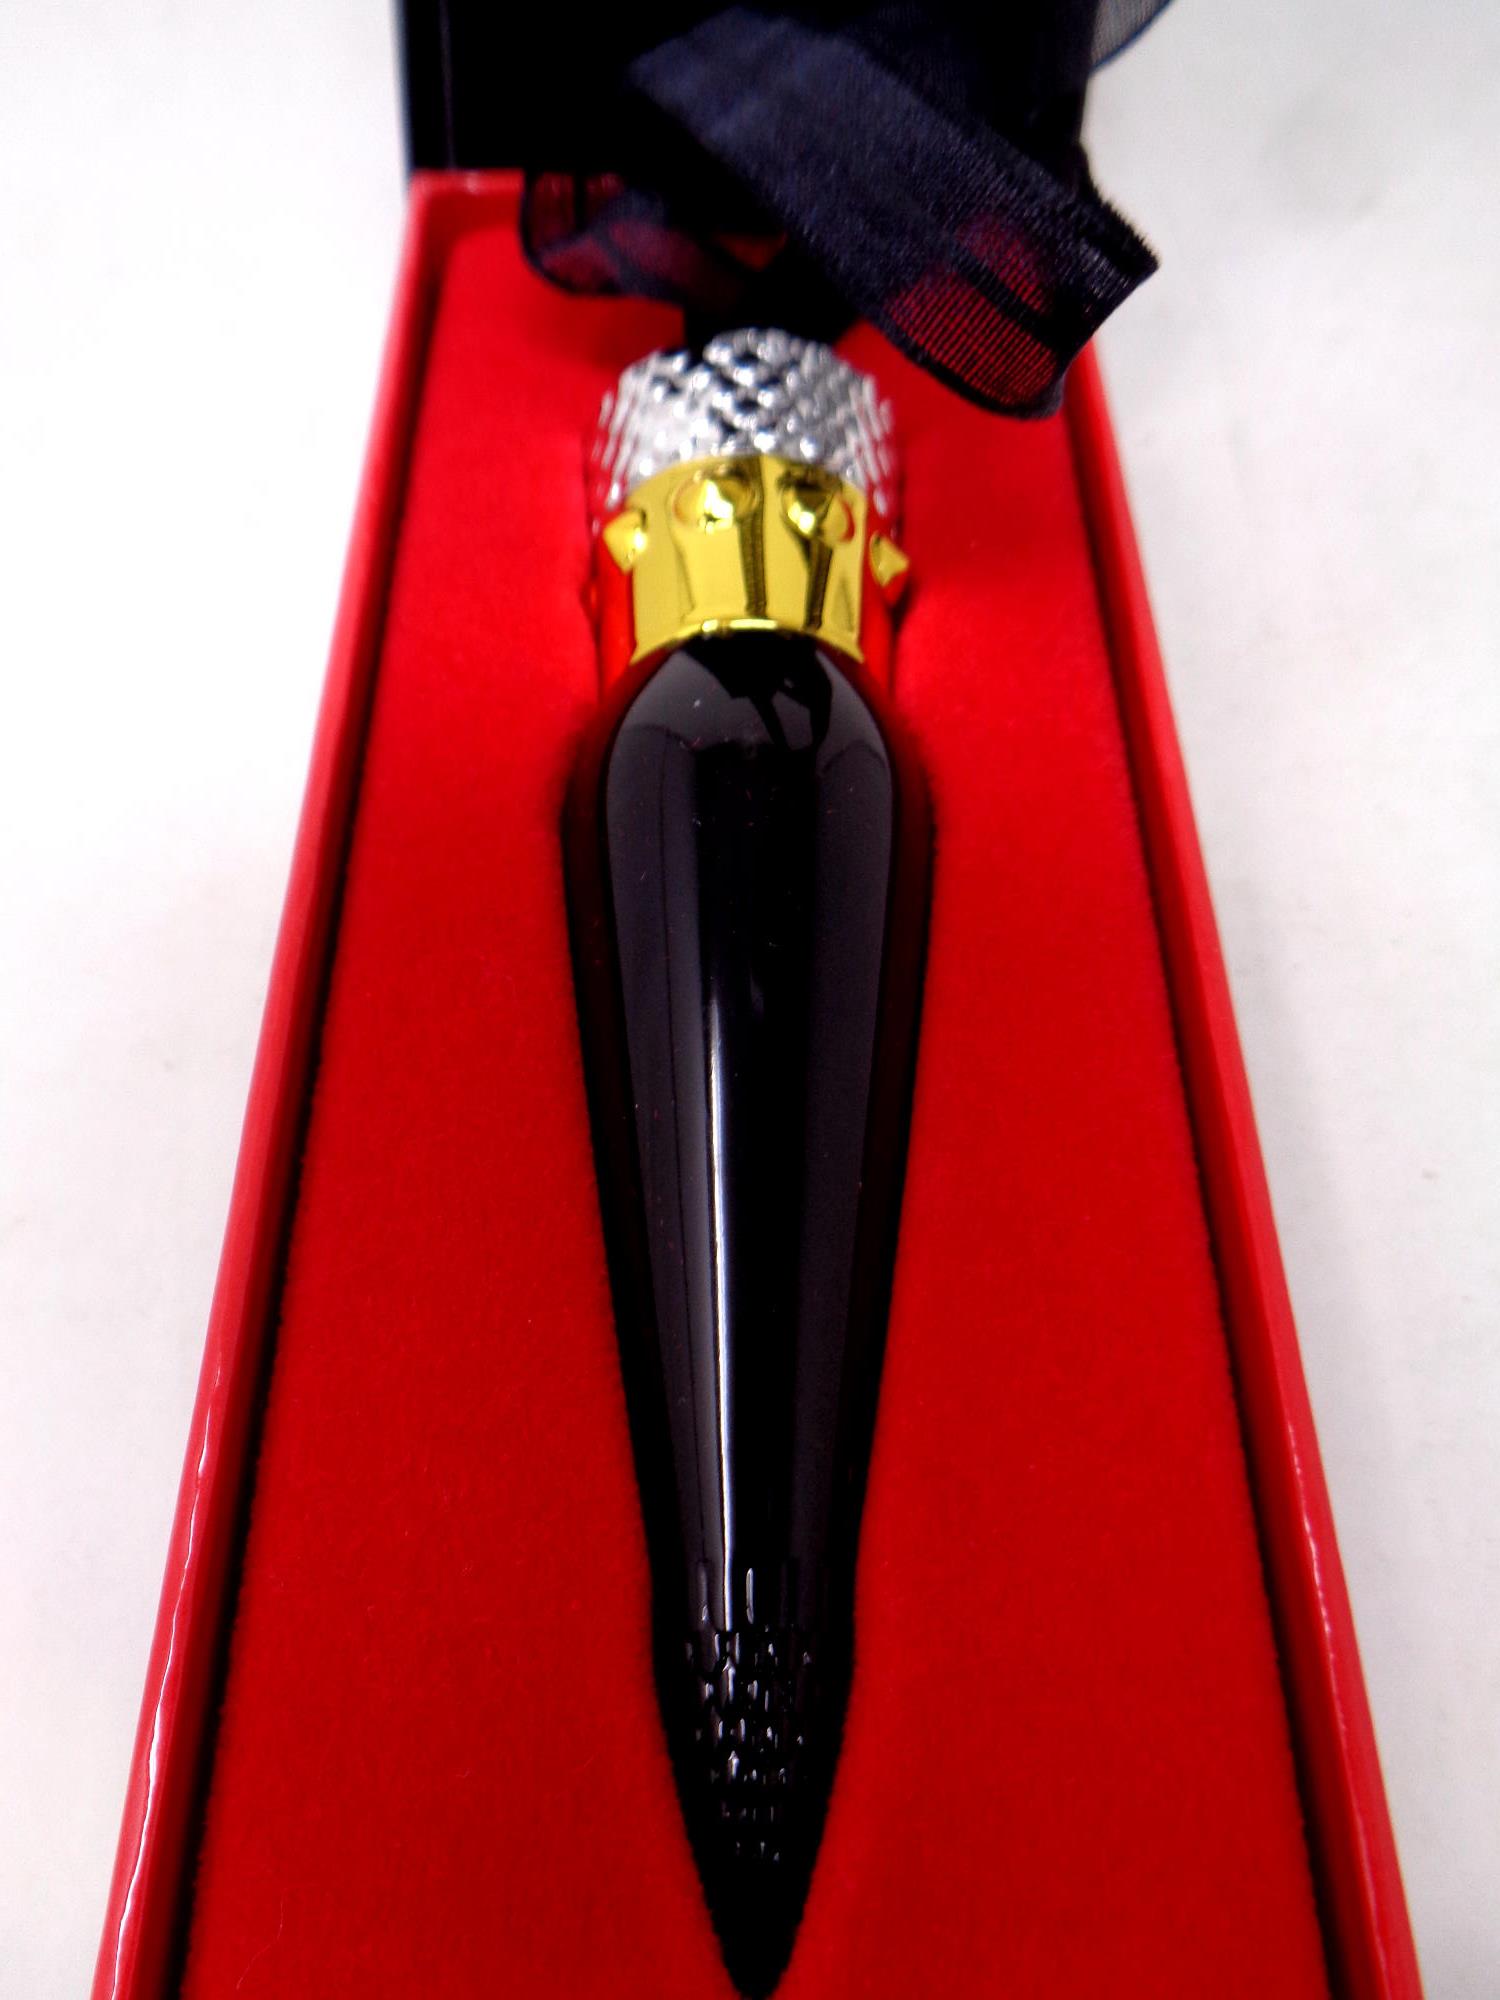 A boxed Christian Louboutin rouge lipstick